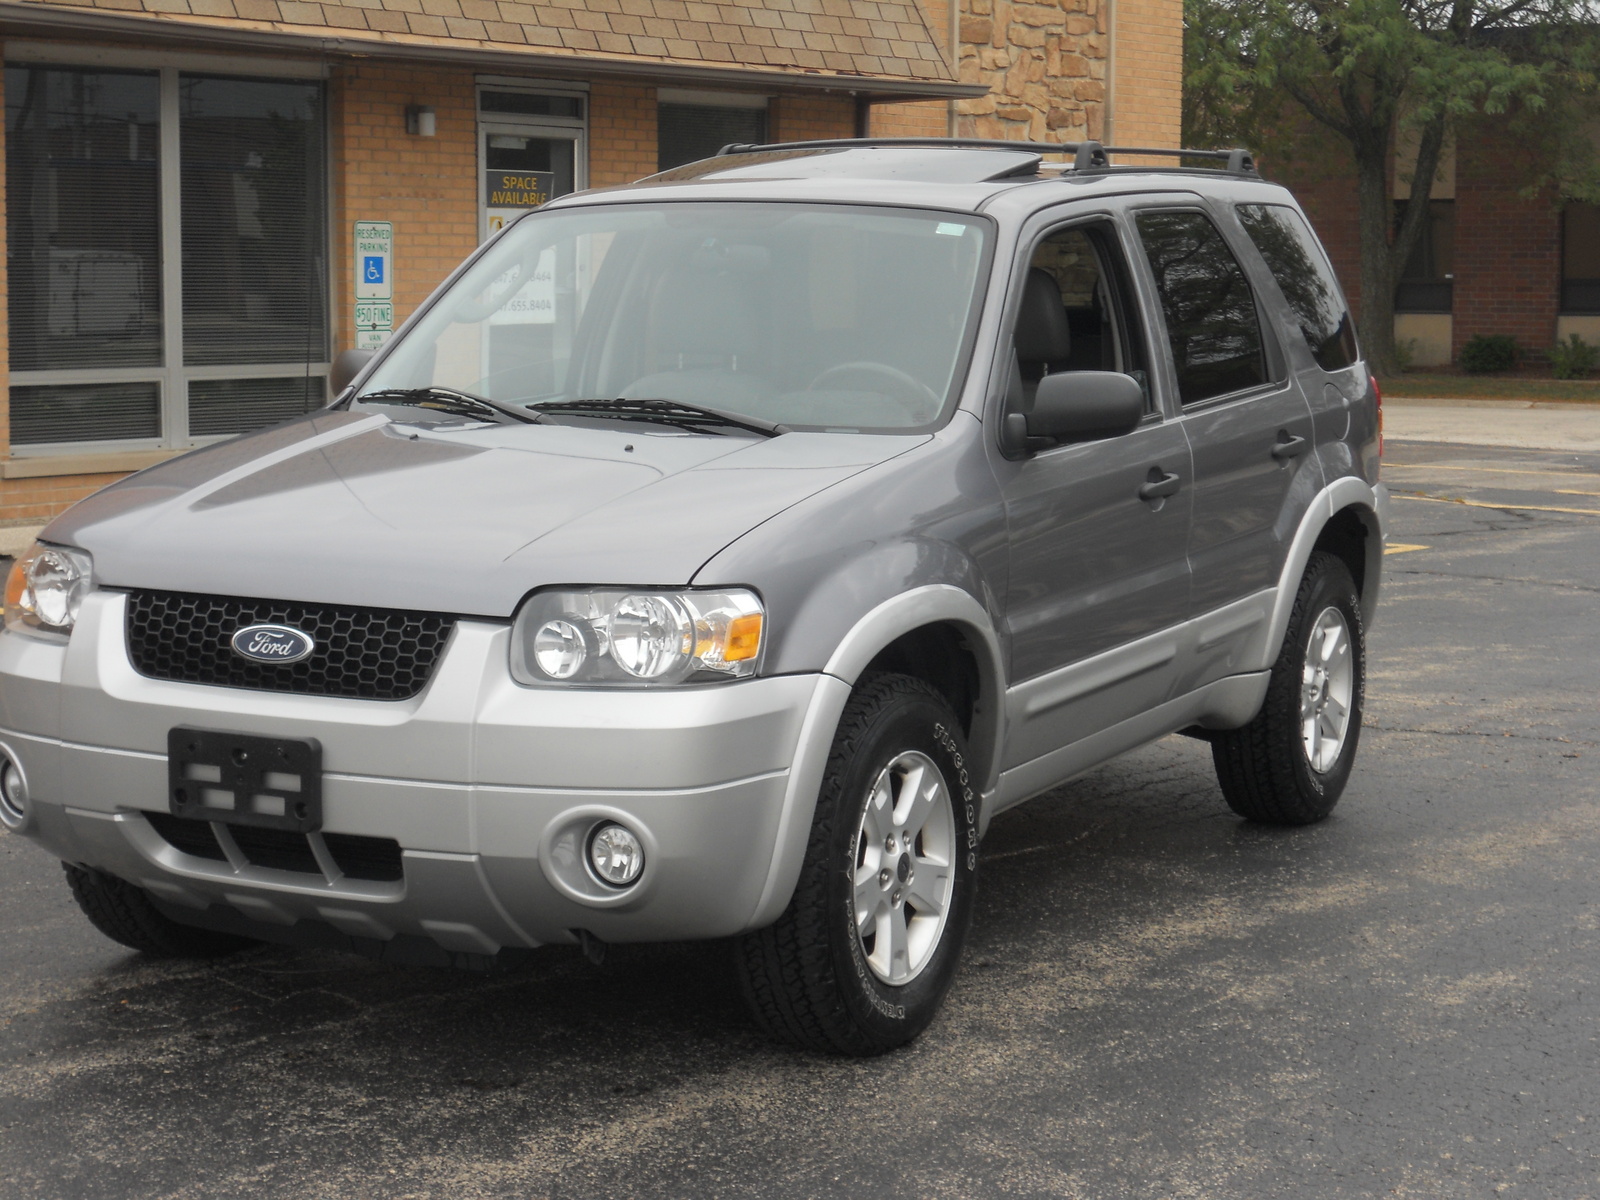 2007 Ford escape limited reviews #1